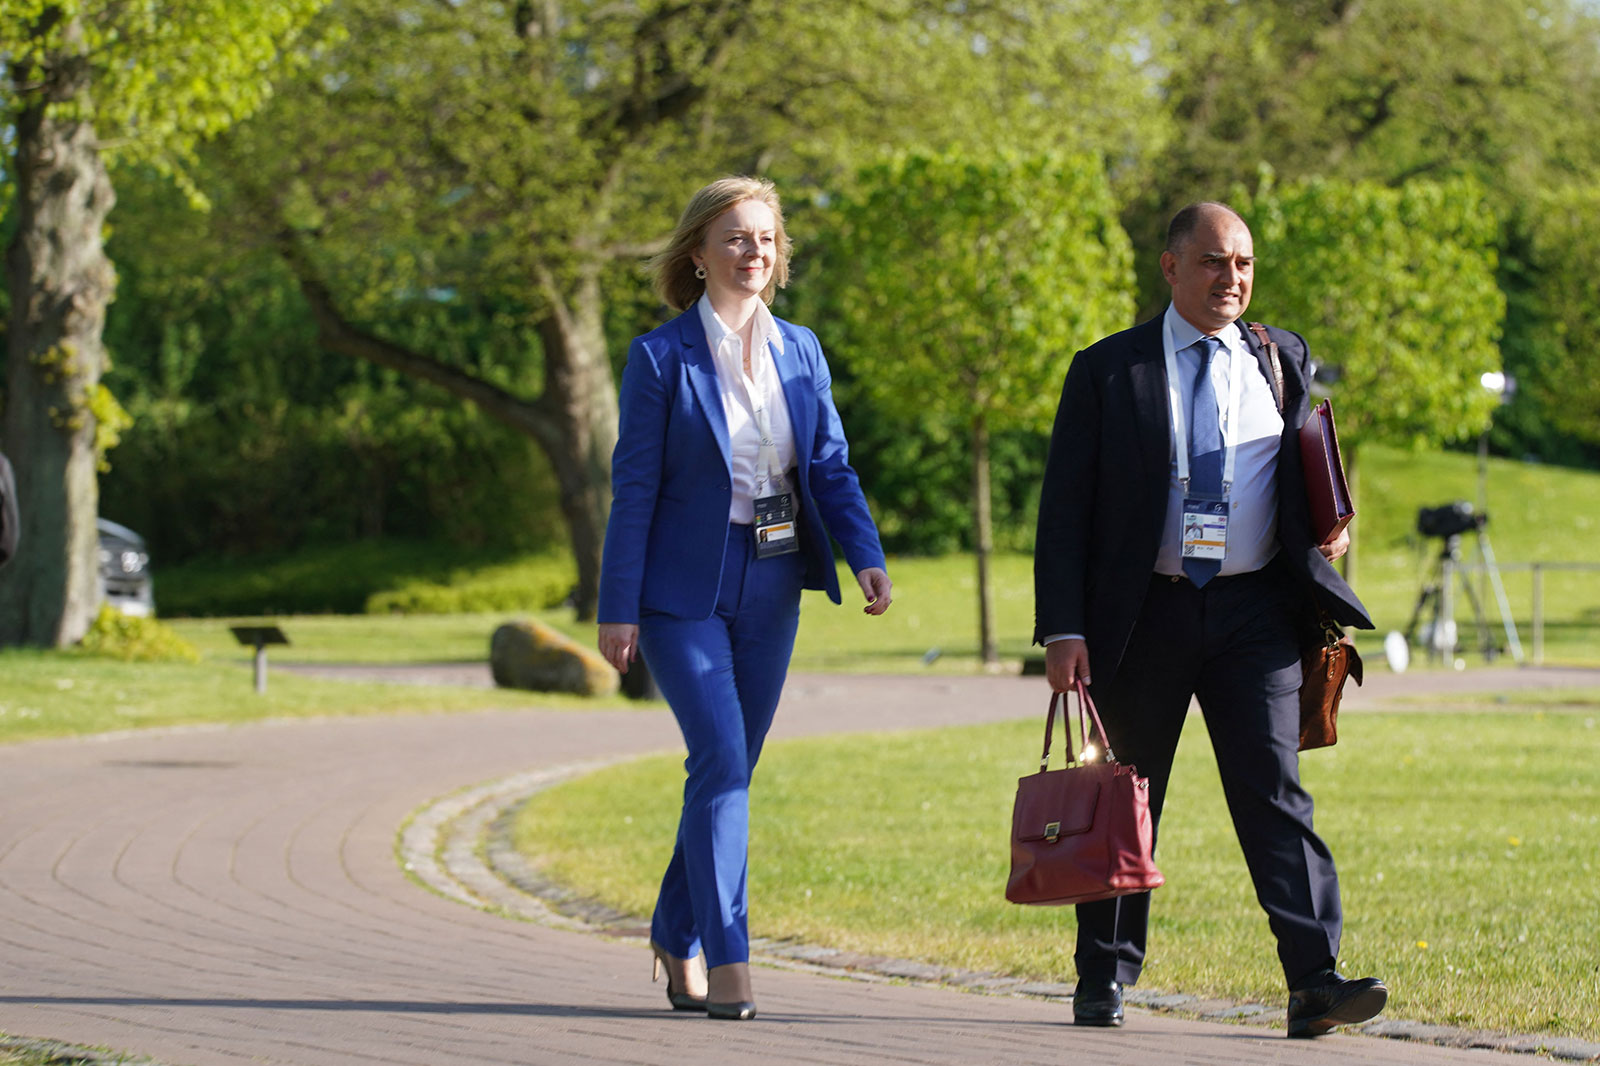 The United Kingdom's Foreign Secretary Liz Truss walks to bilateral talks with her Japanese counterpart at the meeting of the G7 Foreign Ministers in Germany on May 12.